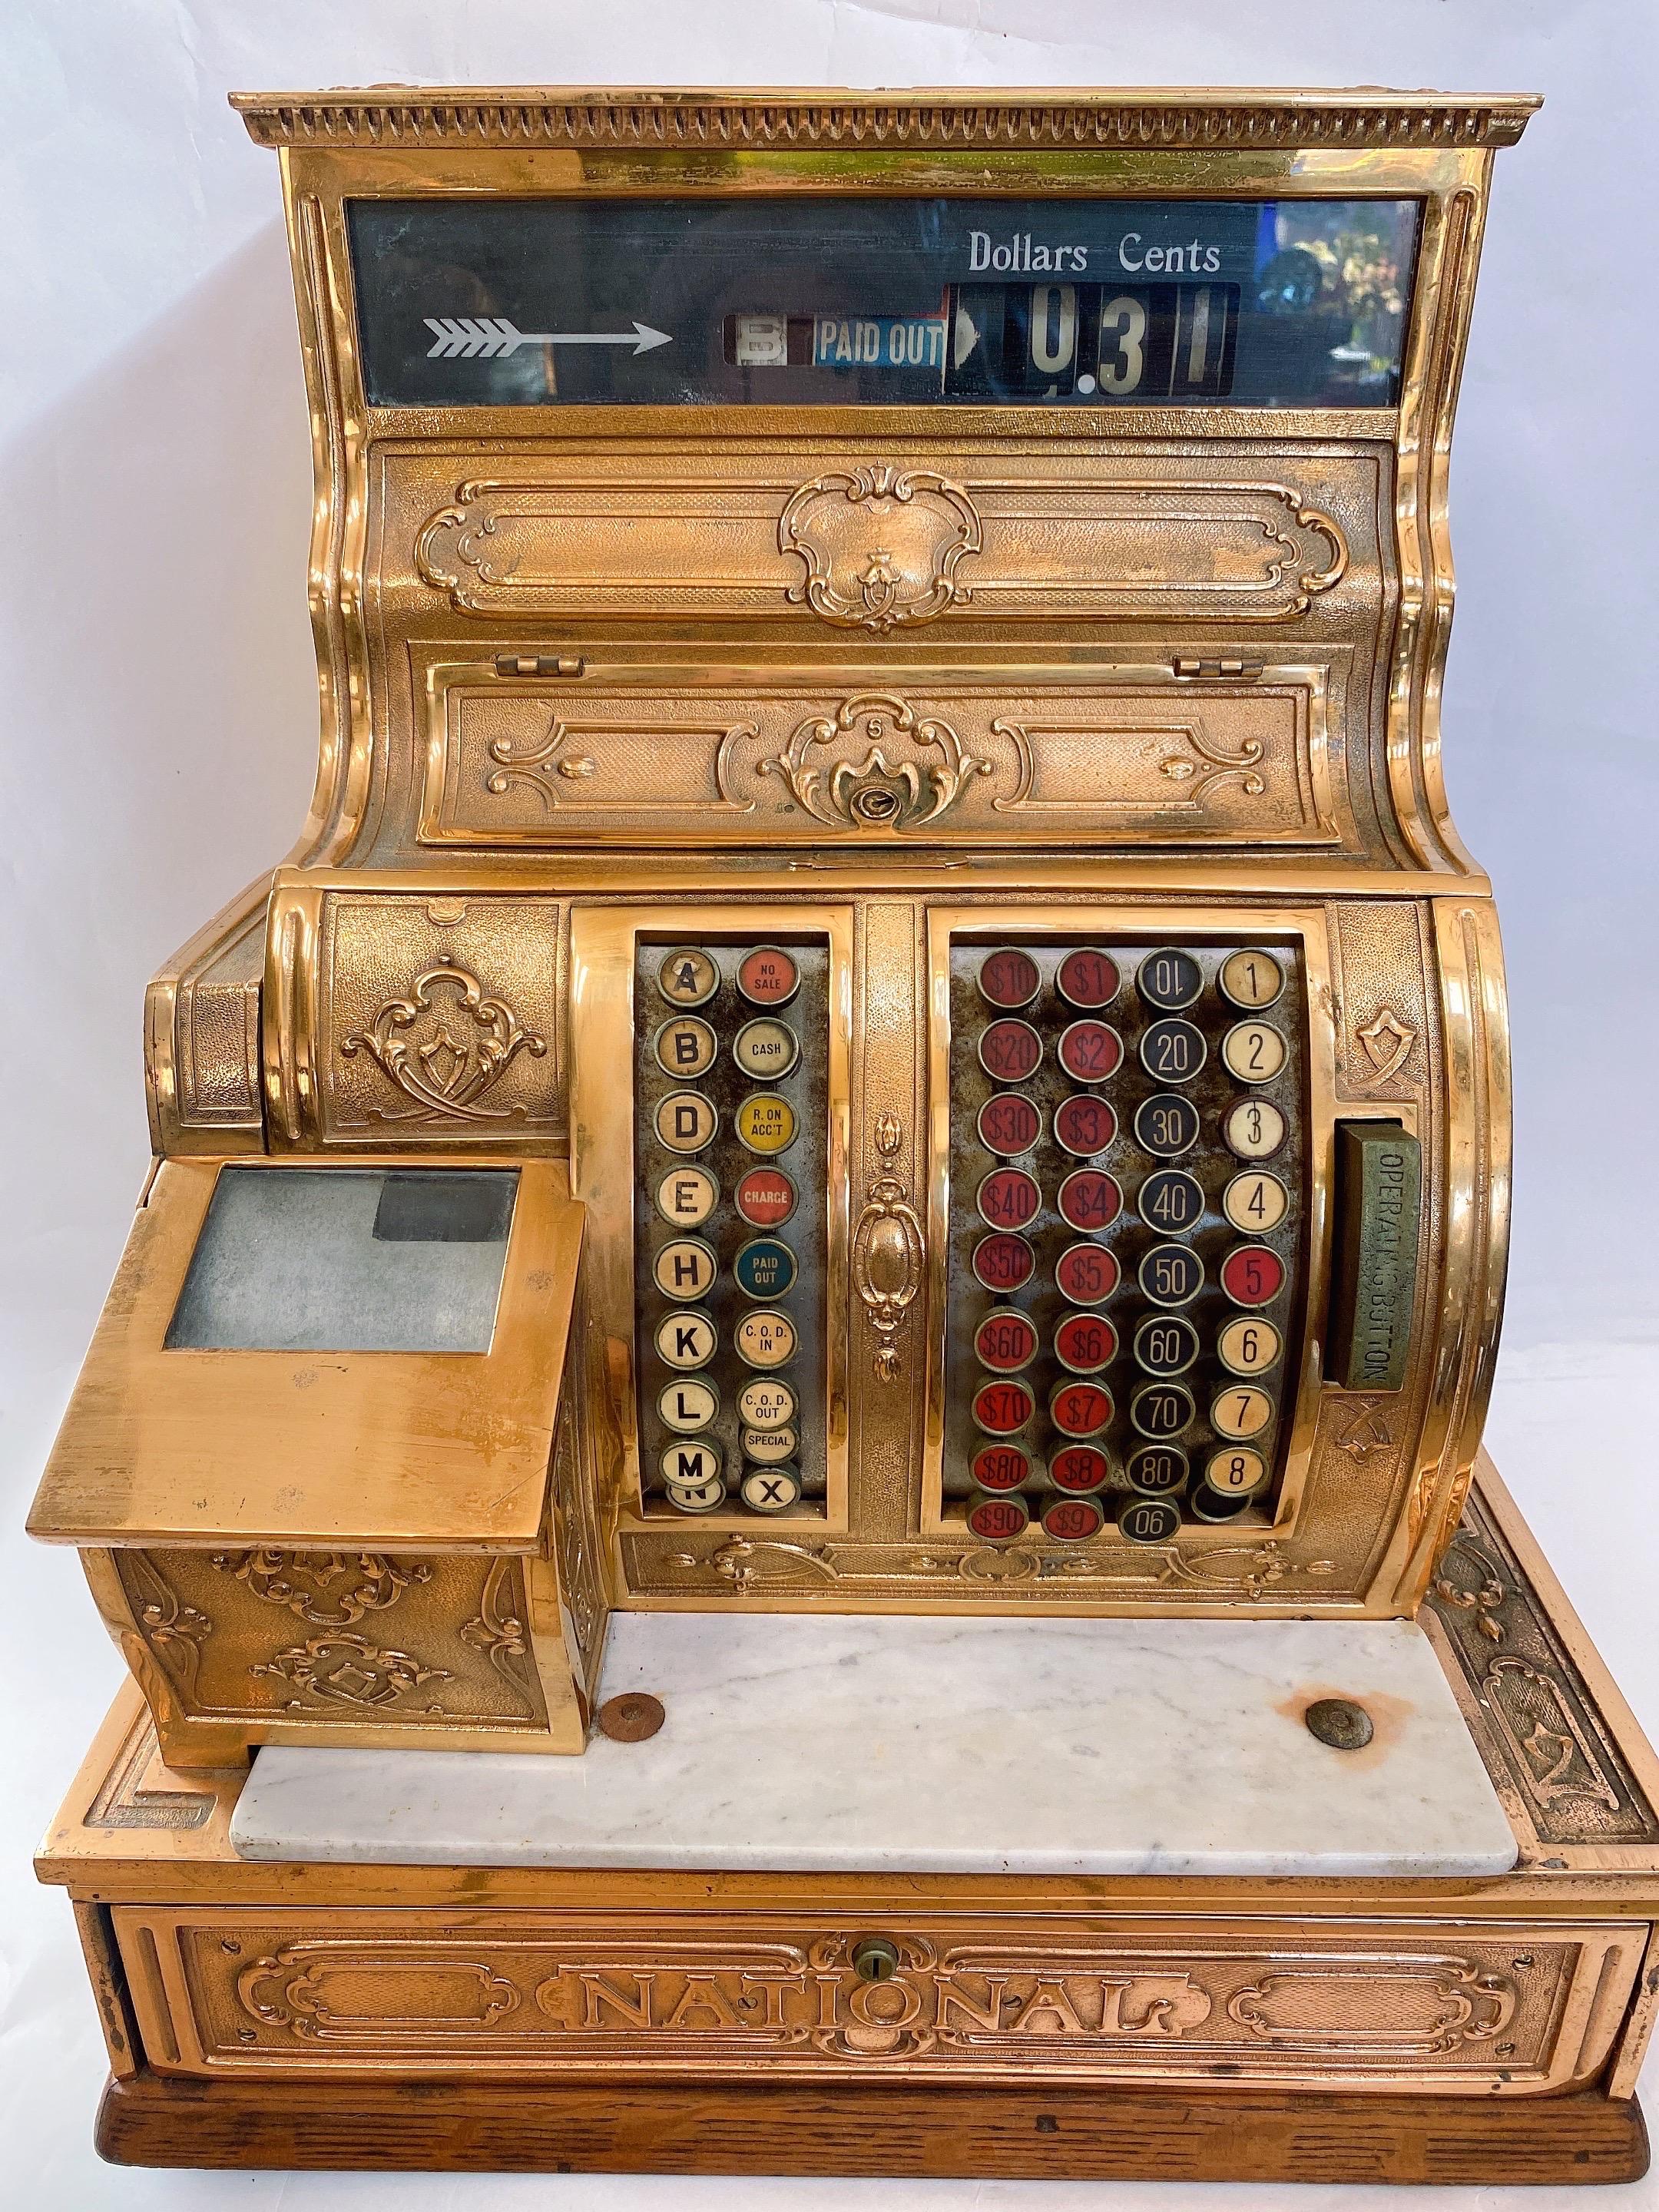 Antique National Cash Register Co. Brass Cash Register, it is a very beautiful cash register, you can't find another better condition than this one. look at more pictures. luck for you.